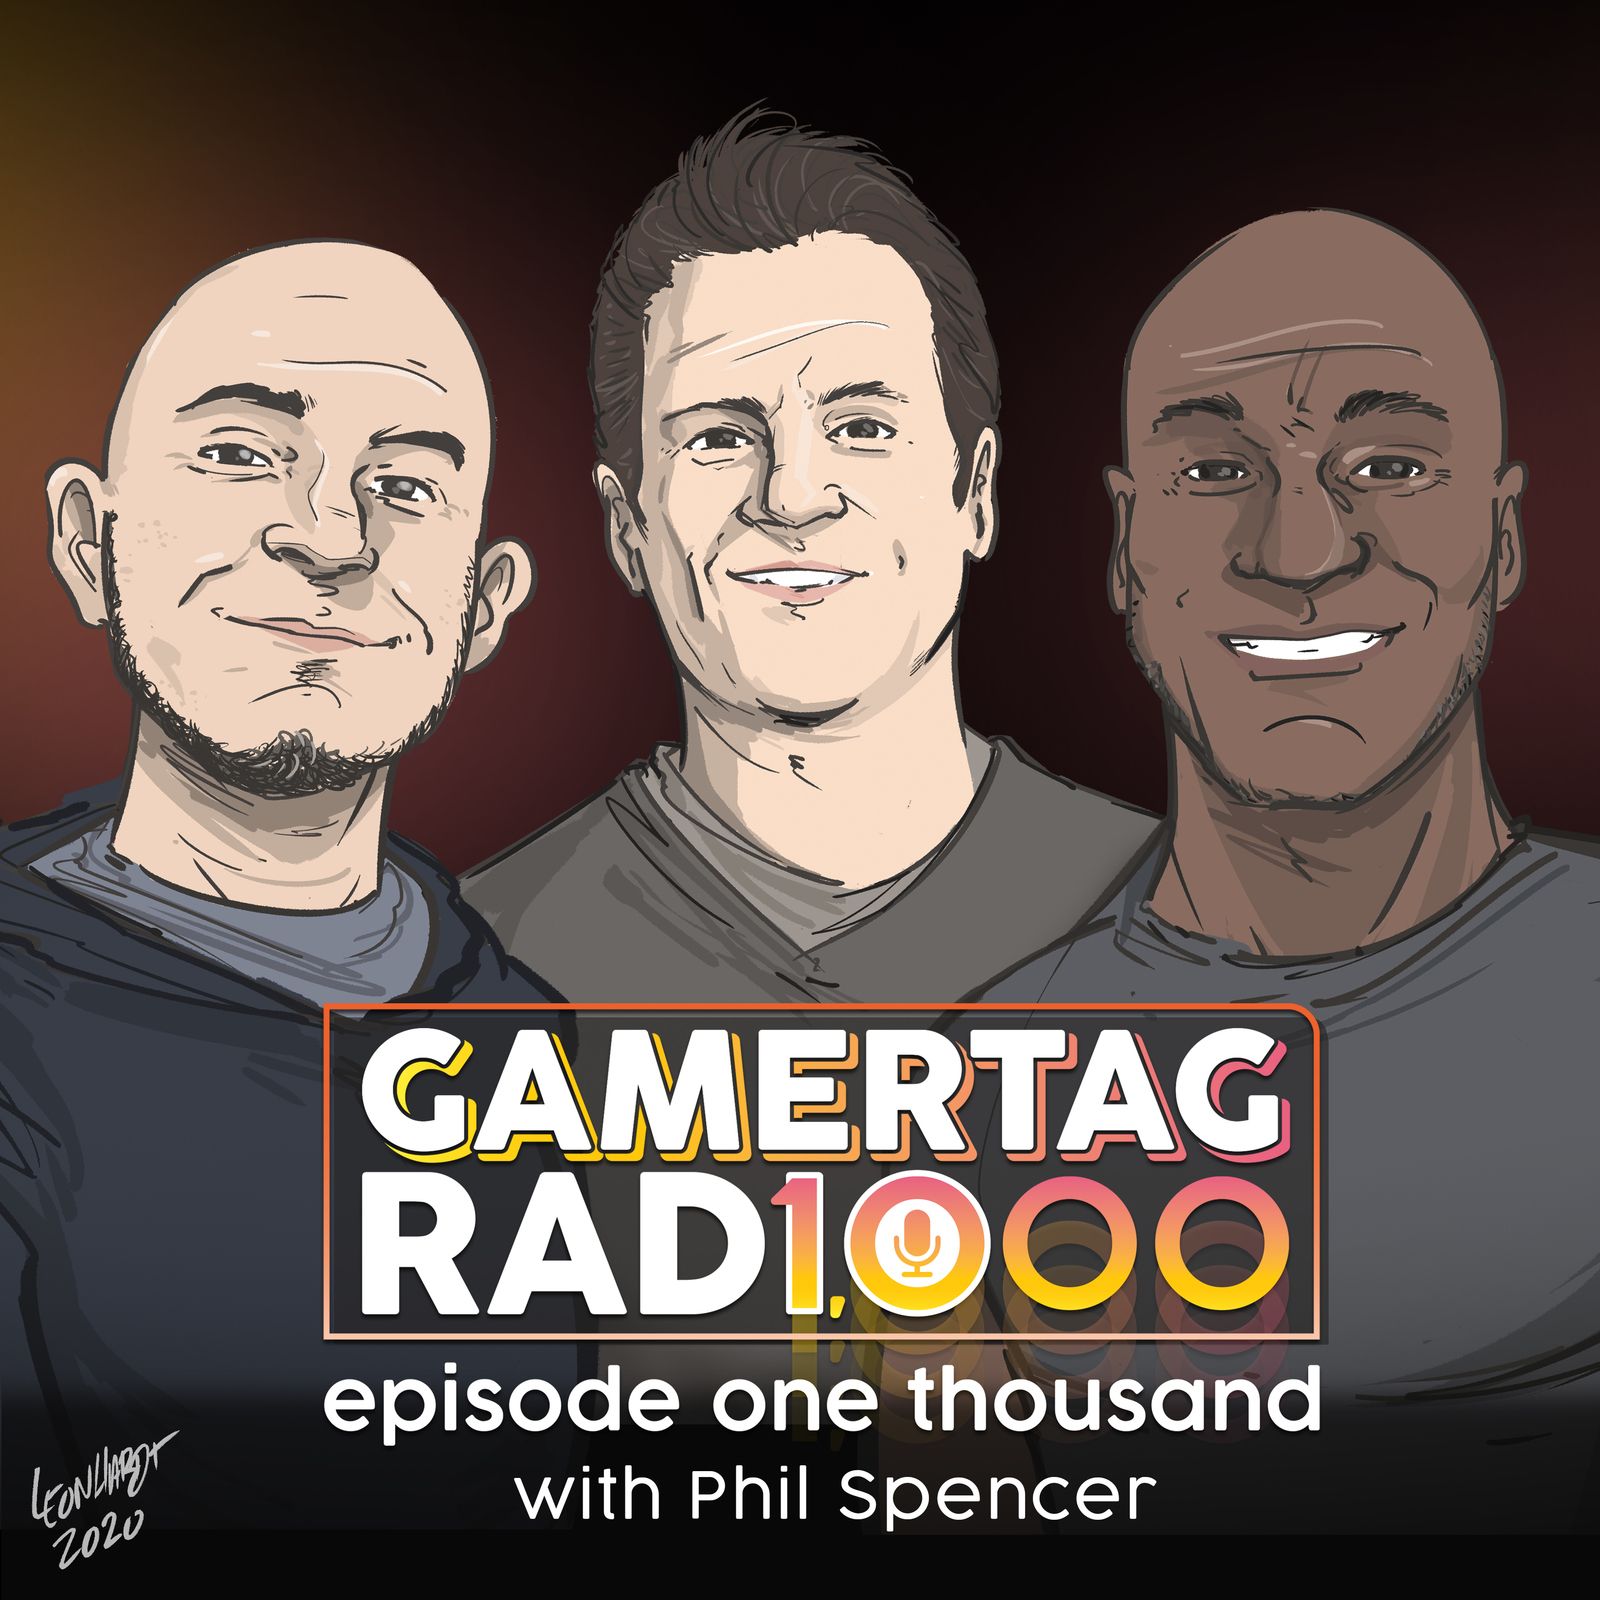 Gamertag Radio / Interview with Phil Spencer about The Past